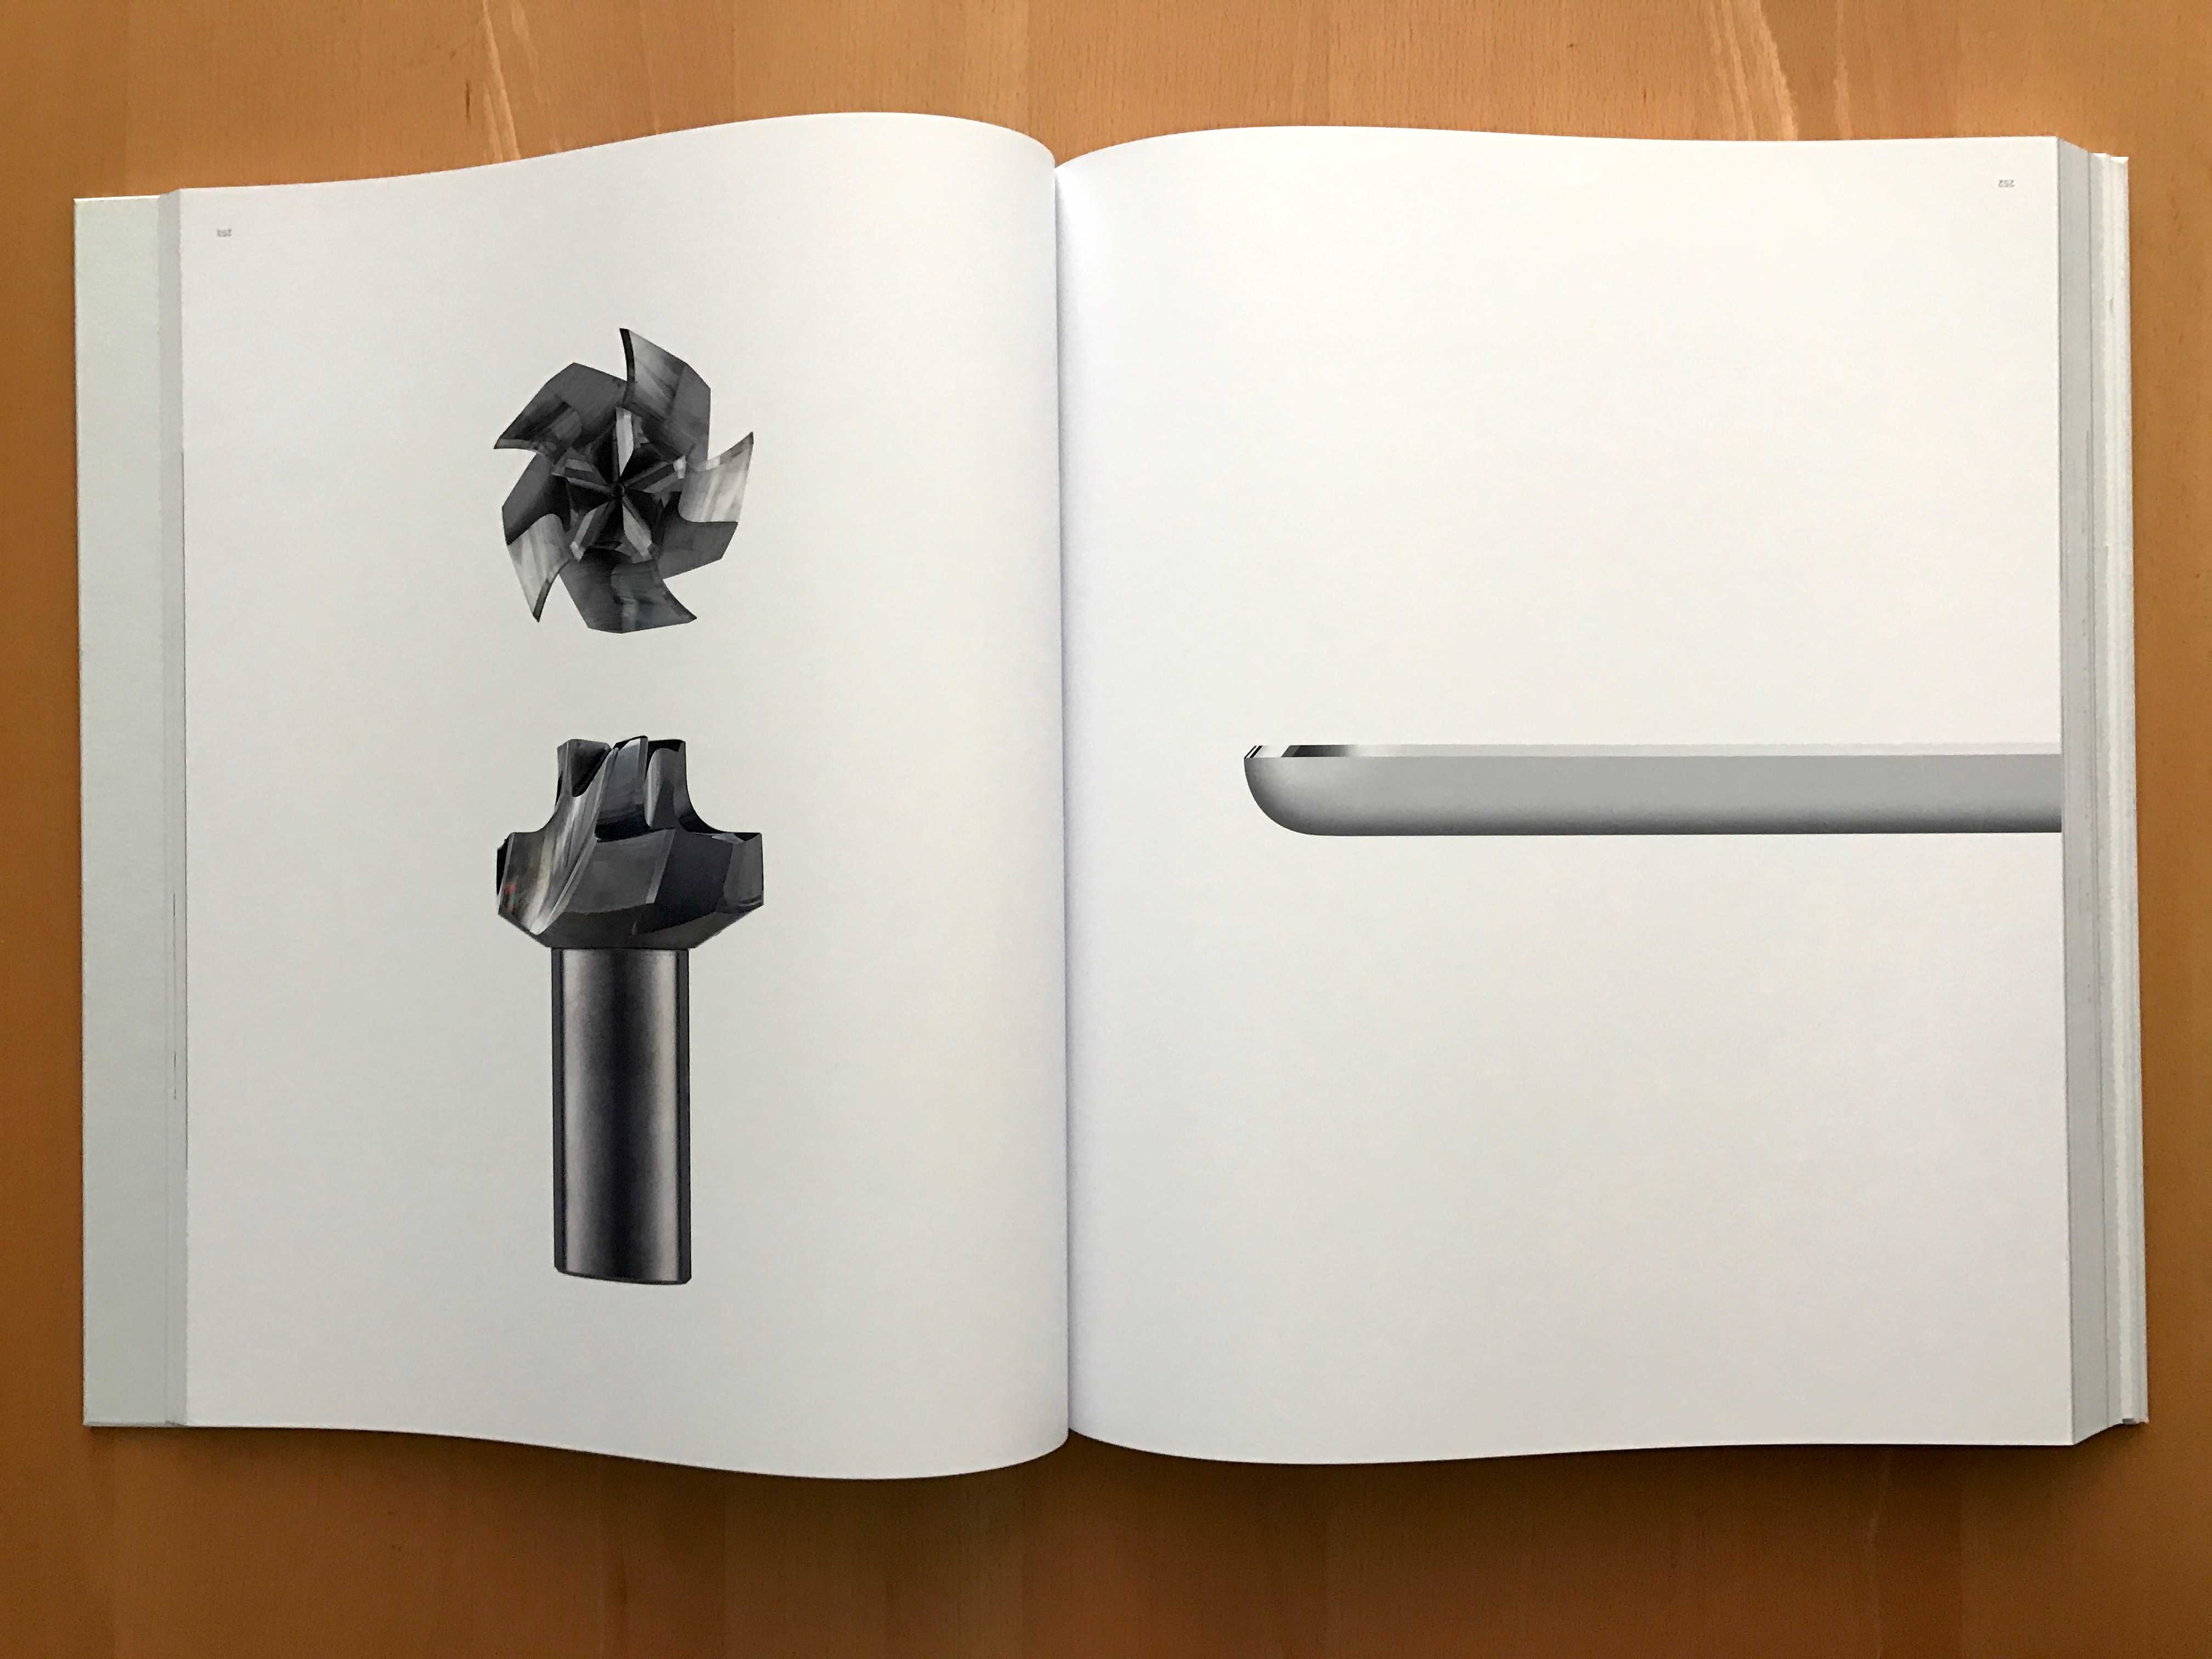 Designed by Apple in California book